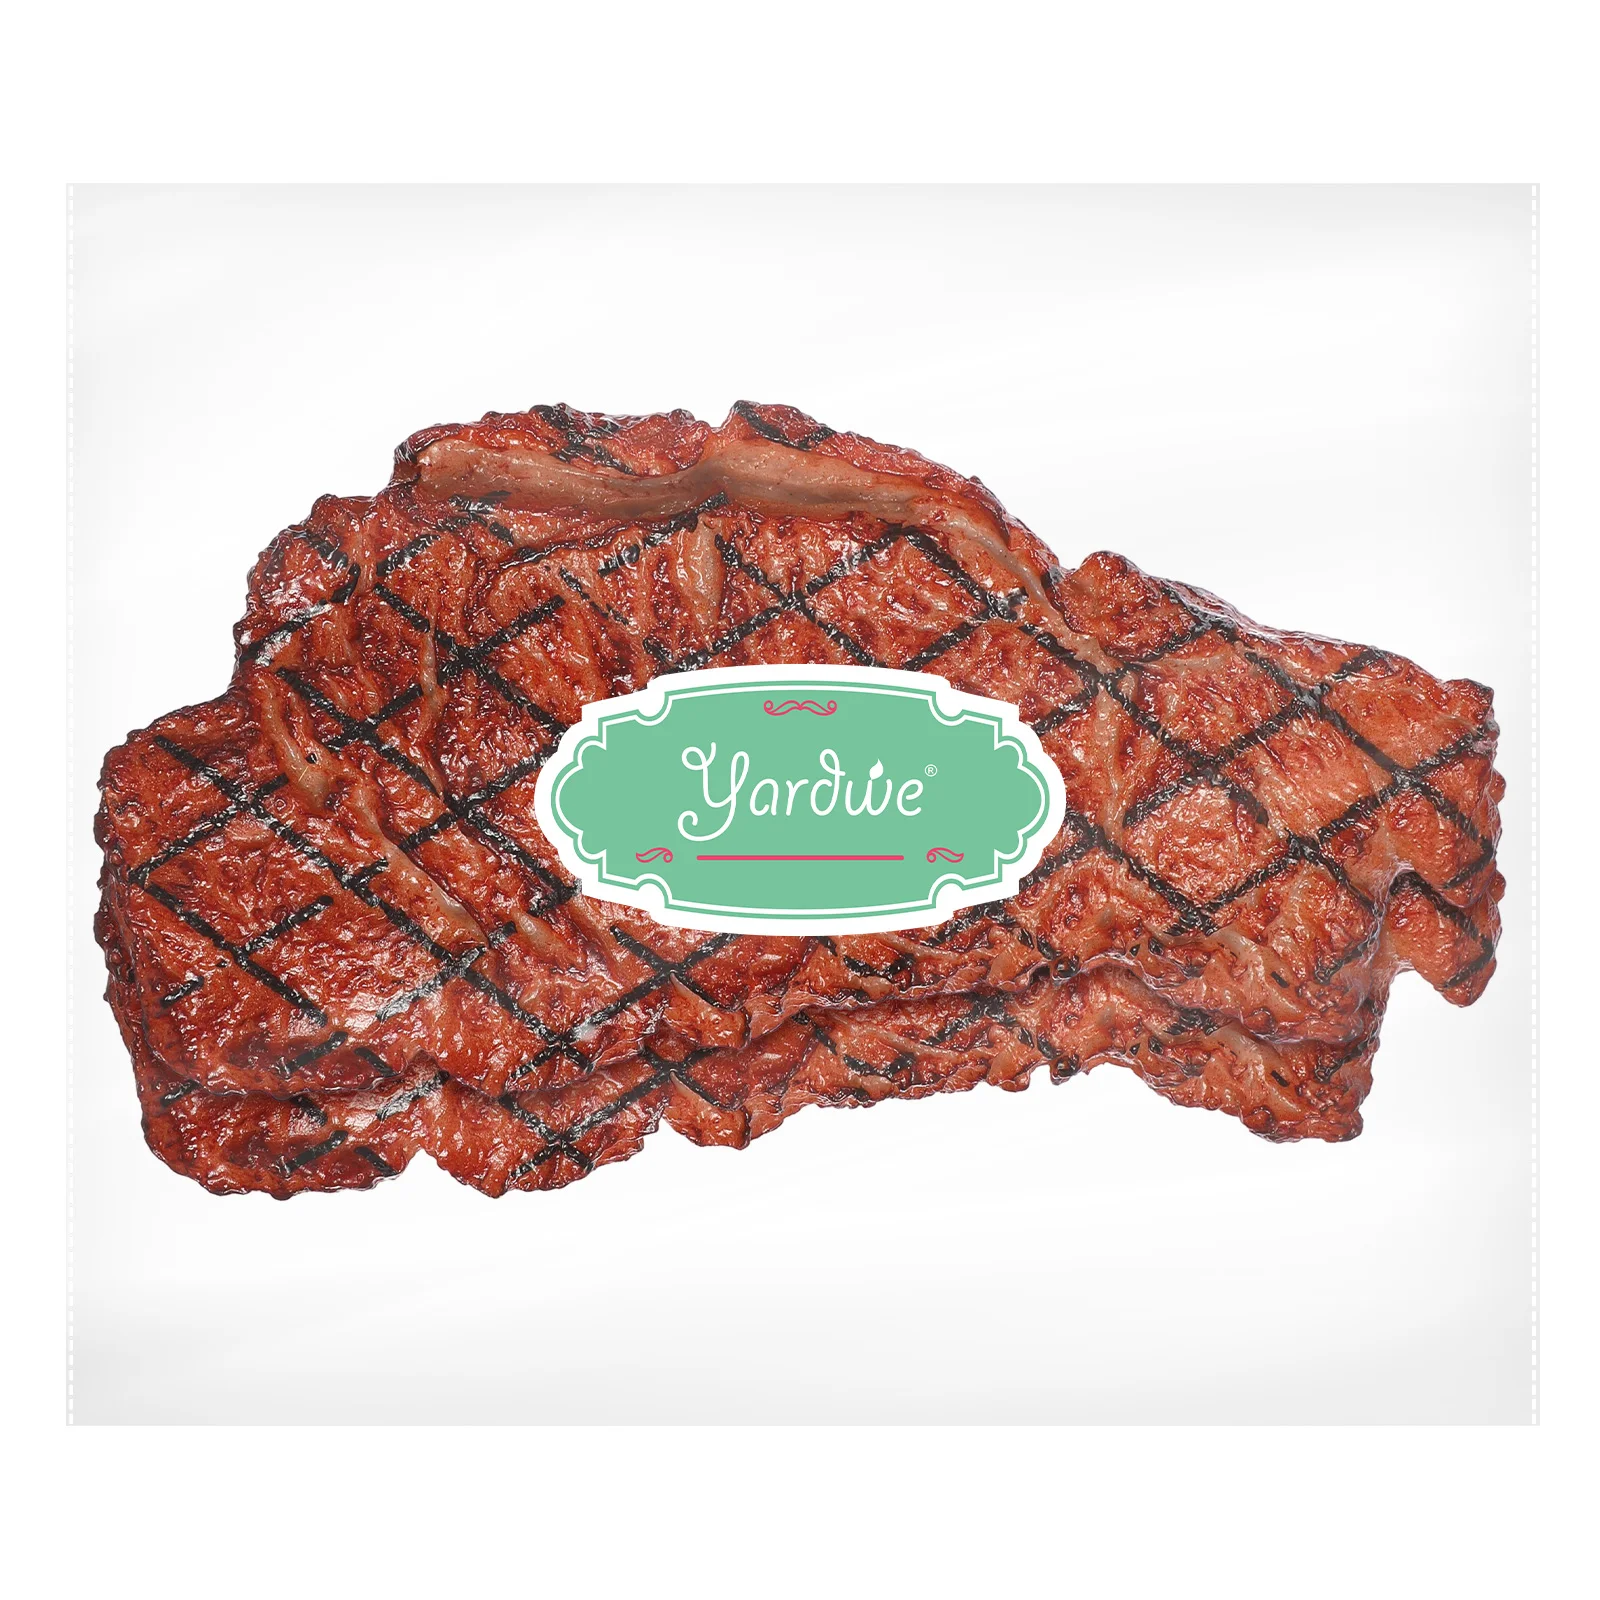 

Steak Fake Artificial Meat Cooked Beef Roast Simulation Model Realistic Props Lifelike Toy Display Prop Decors Ornaments